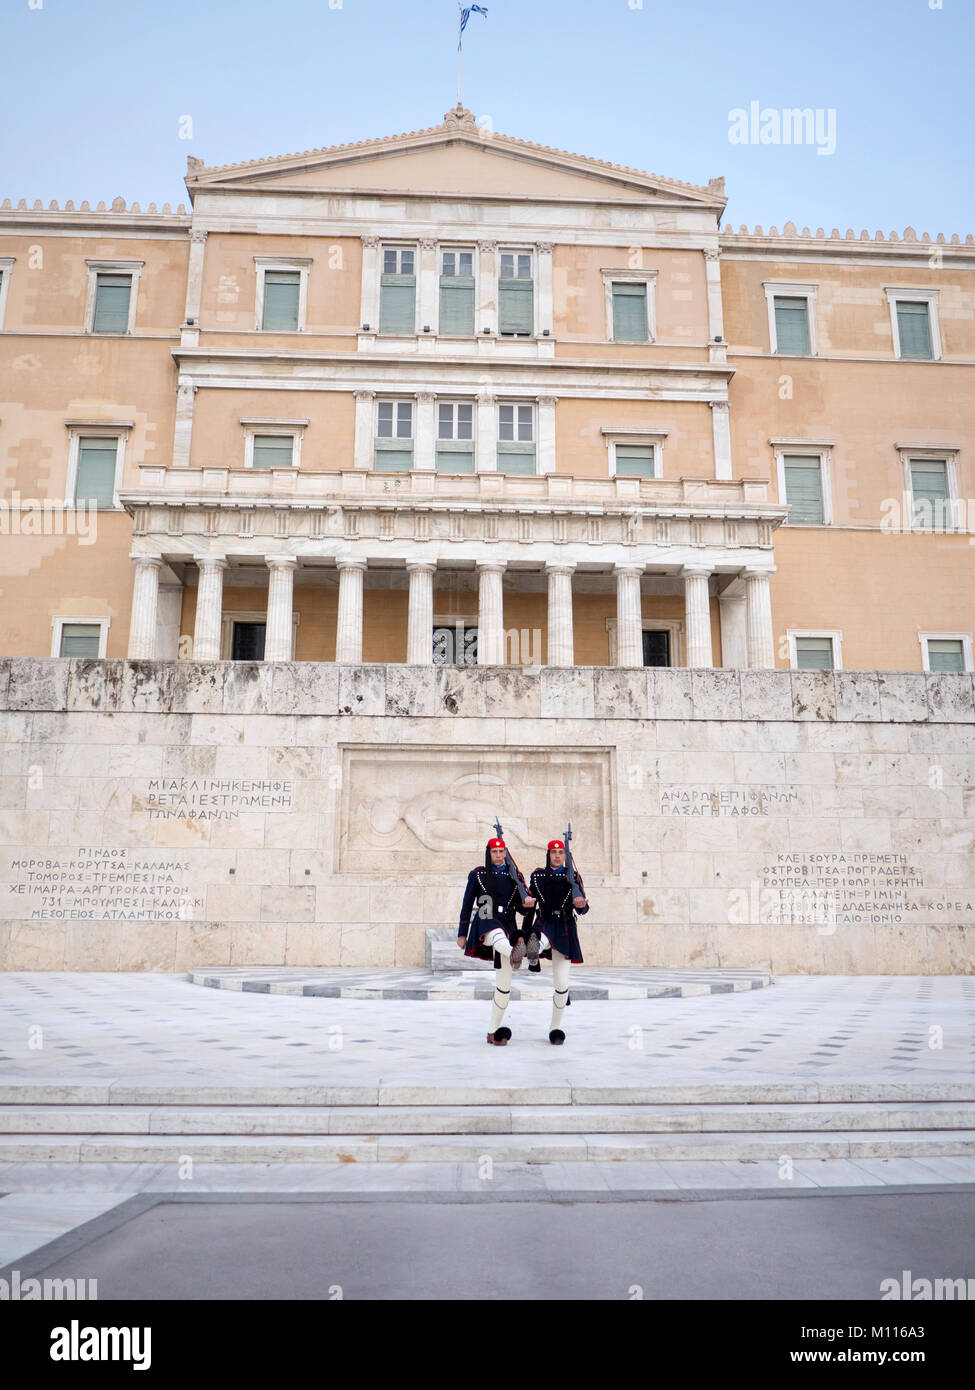 ATHENS,GREECE - MARCH 26, 2016: The Greek Presidential guards called Tsoliades dressed in traditional uniform at the monument of the unknown soldier i Stock Photo